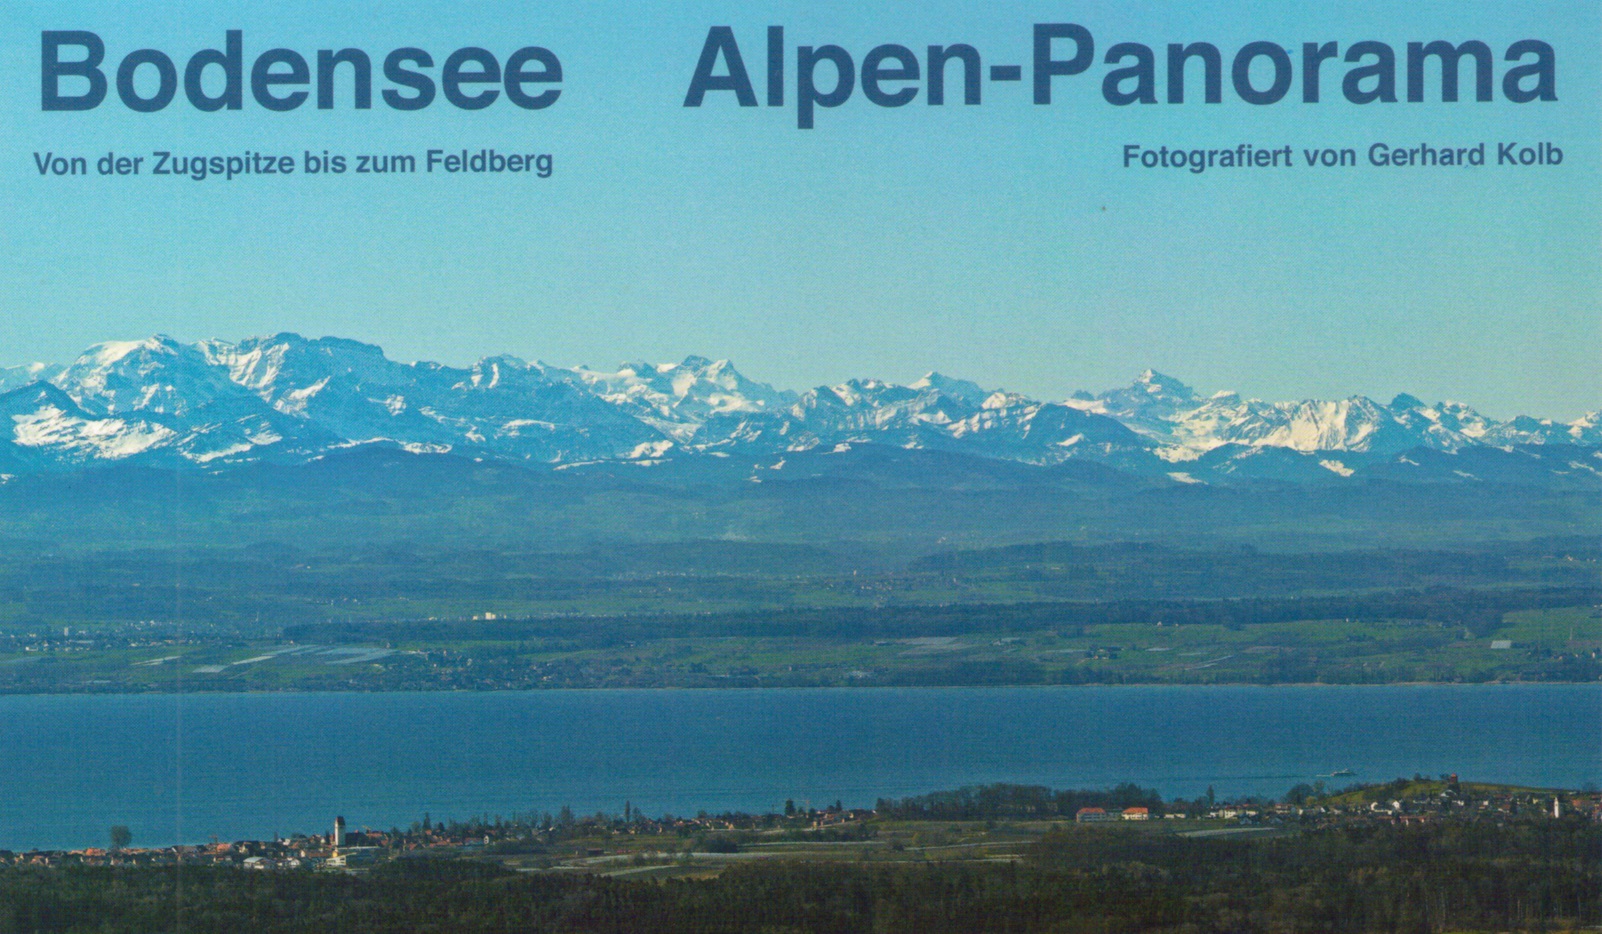 Bodensee Alpen-Panorama